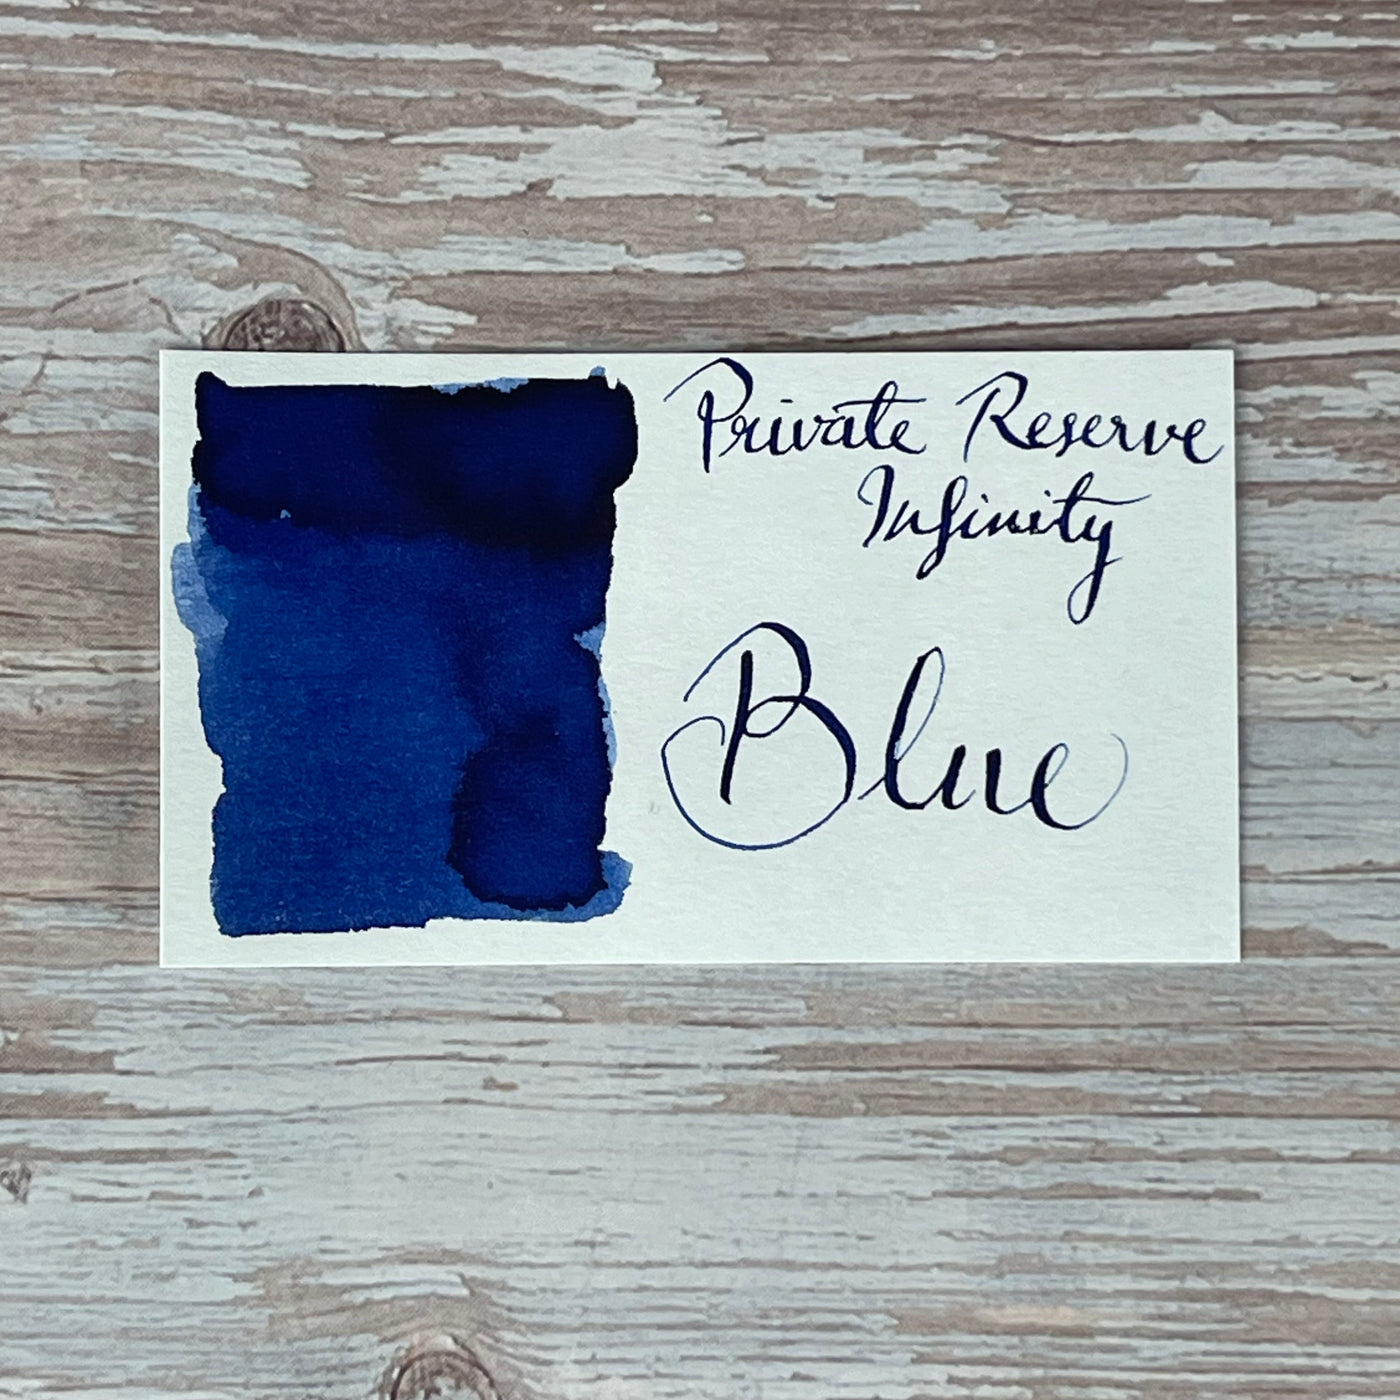 Private Reserve Infinity Blue - 30ml Bottled Ink